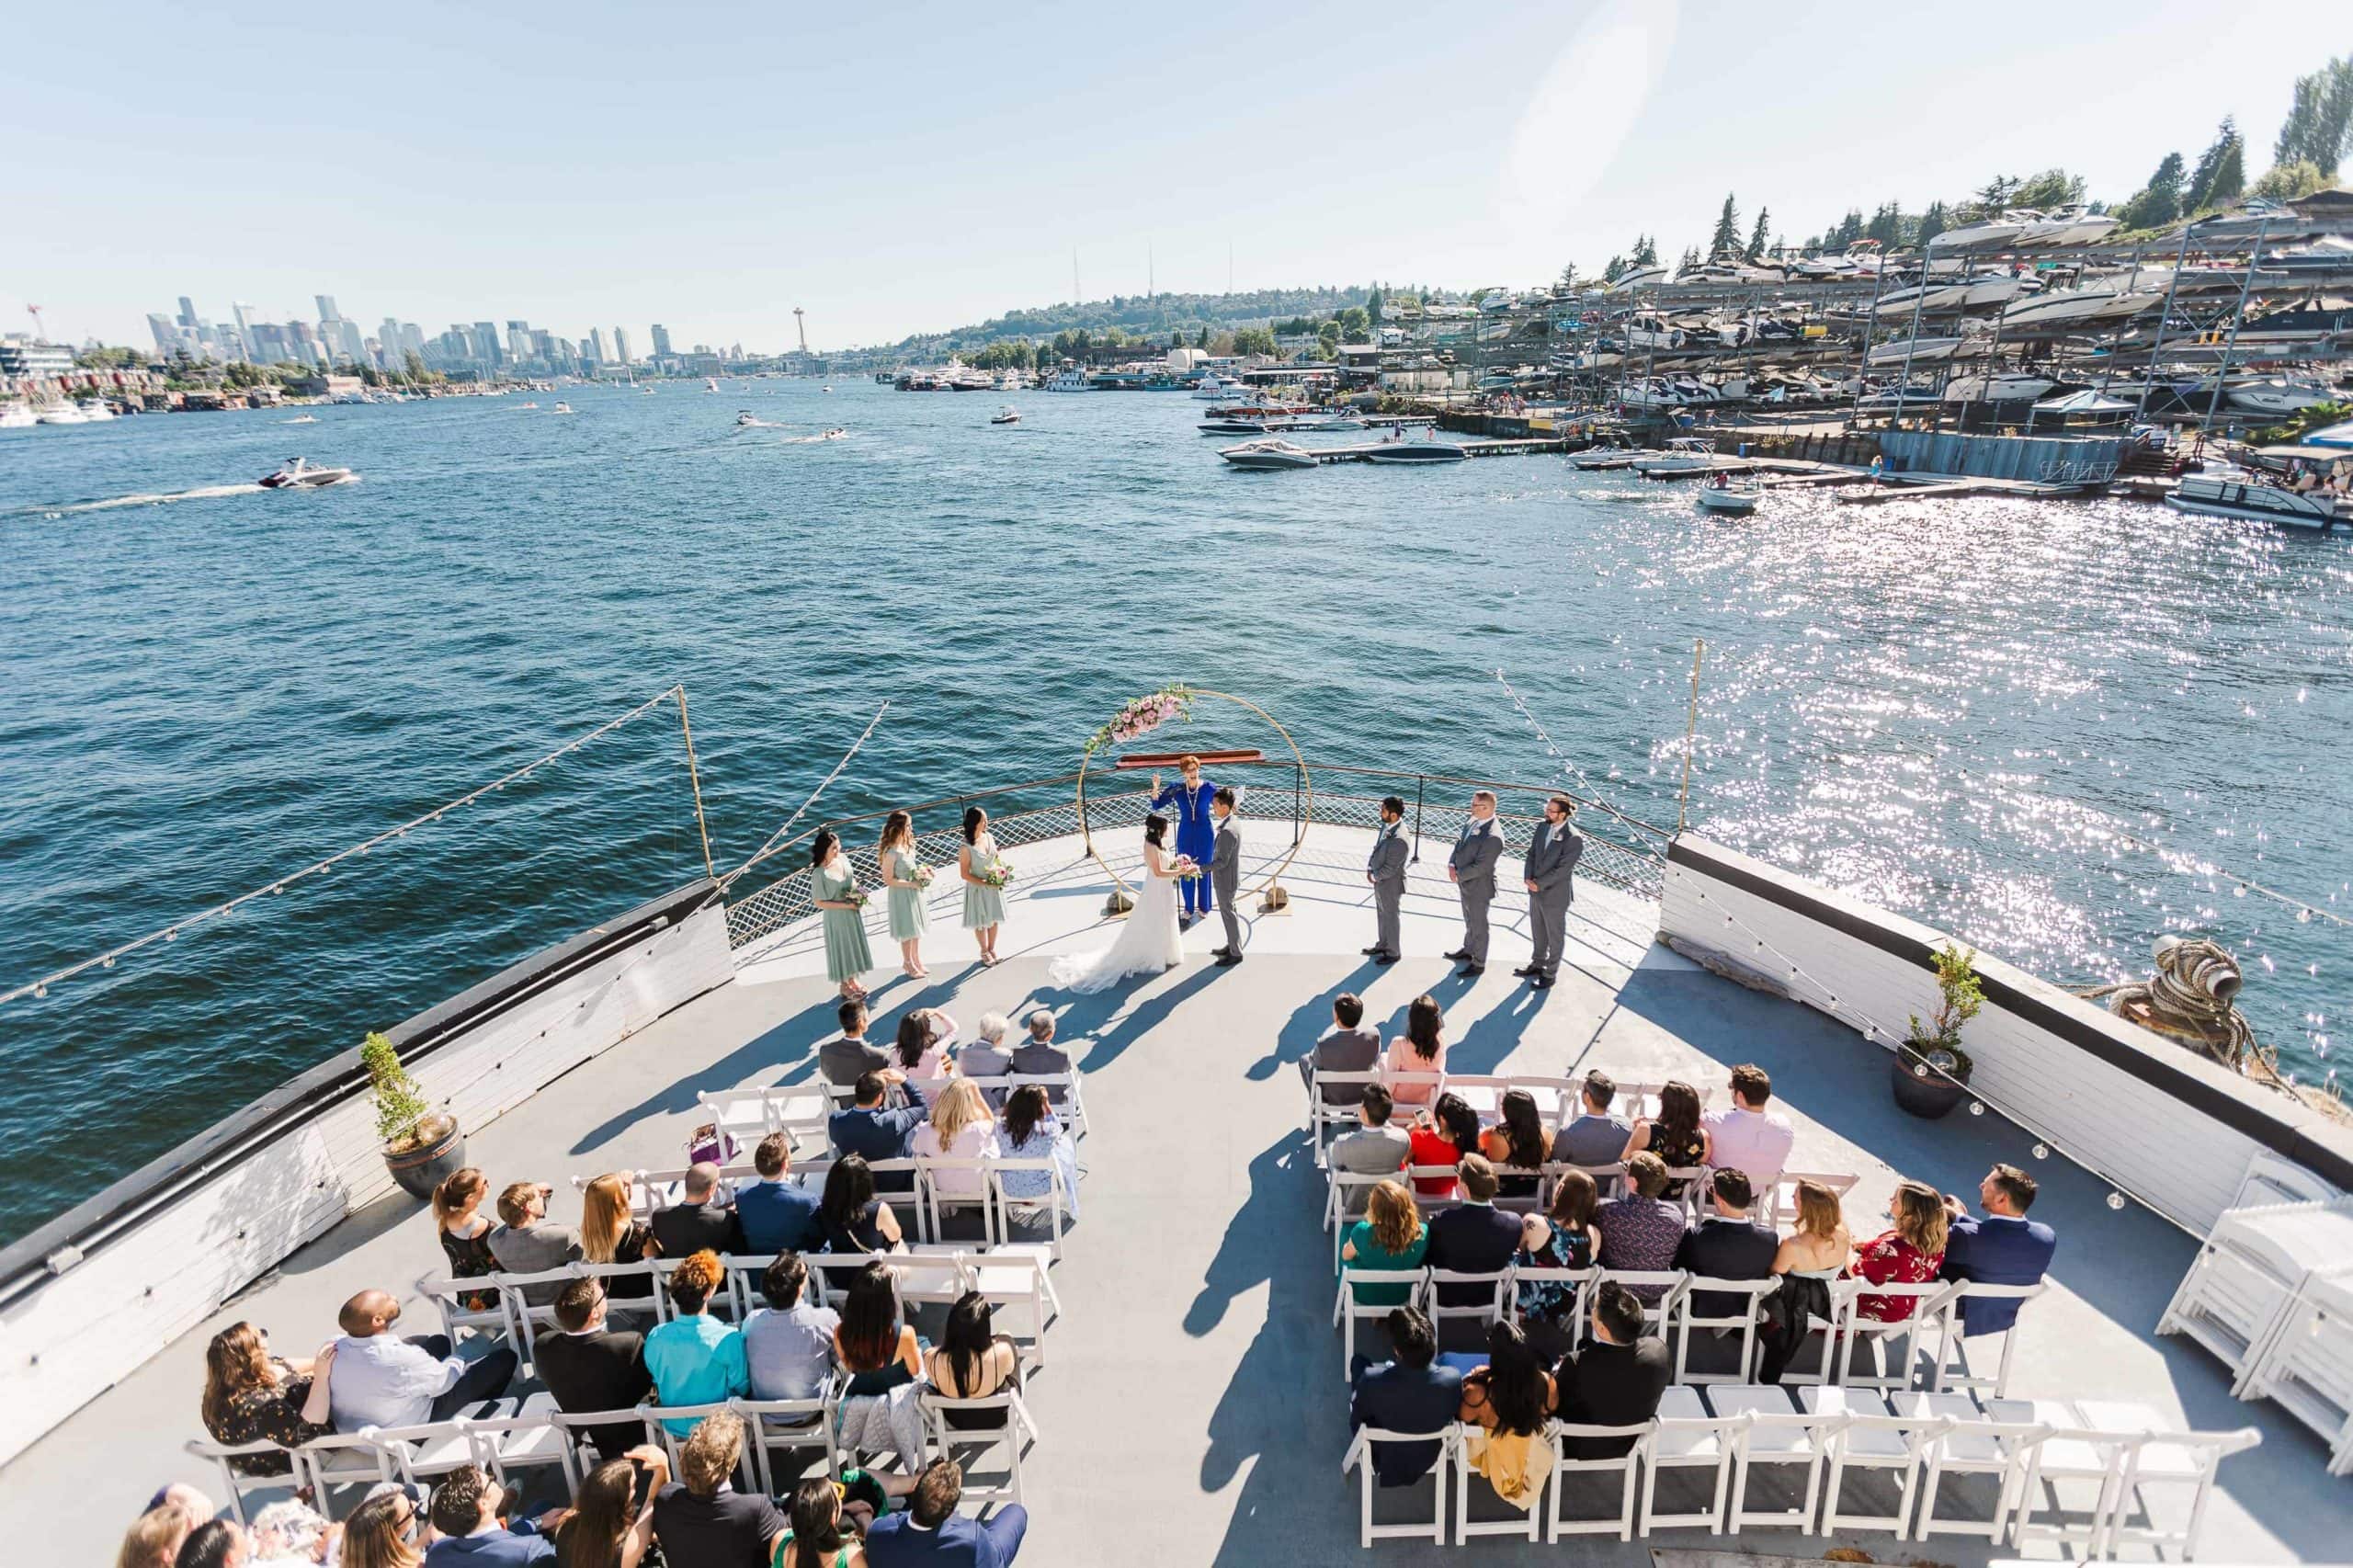 Looking down at a wedding ceremony on the balcony of a boat. You can see the Seattle skyline in the background.